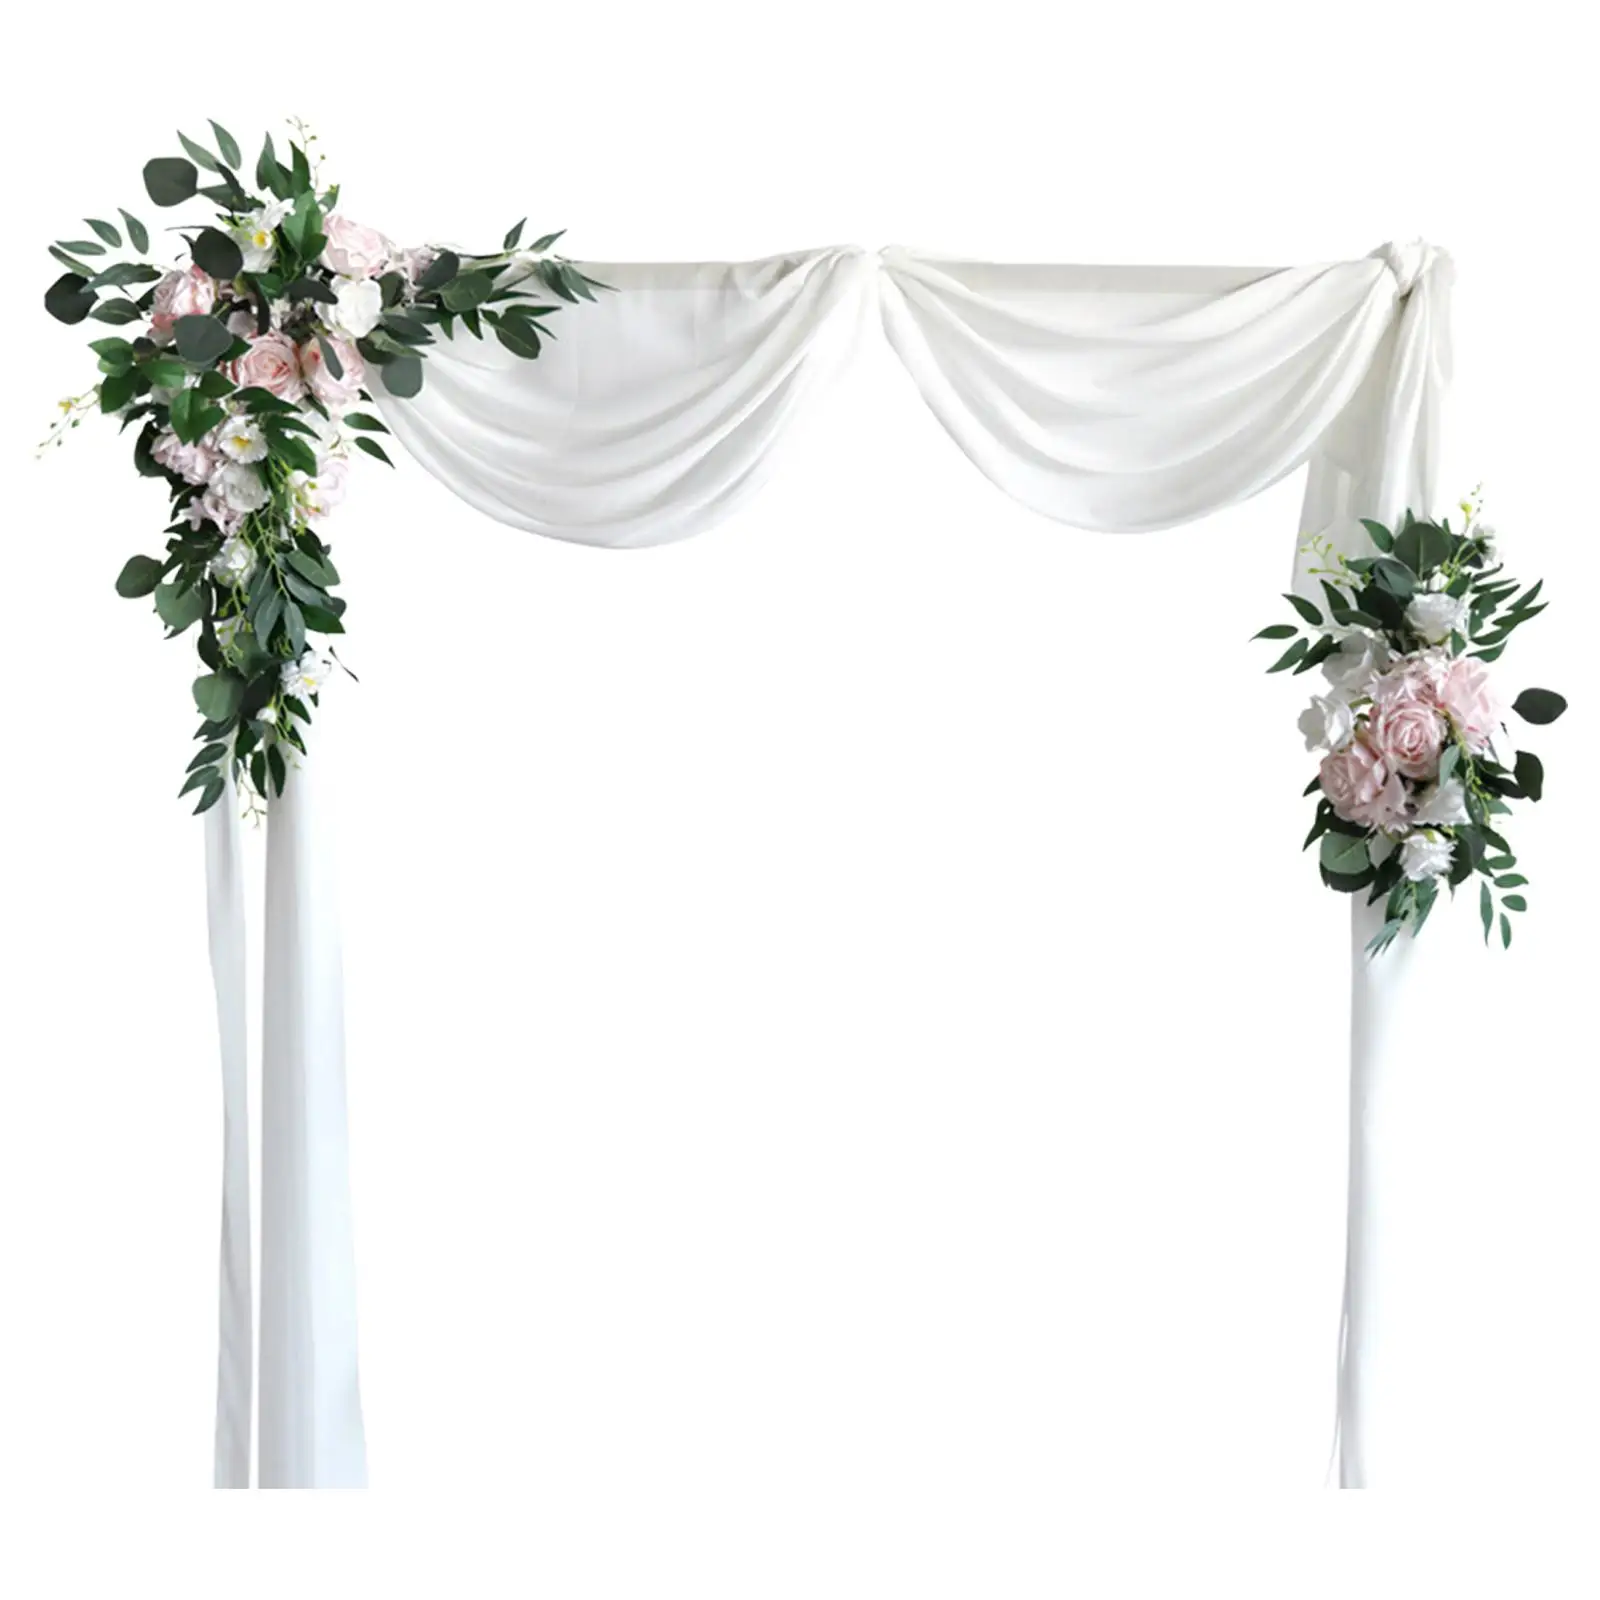 2Pcs Artificial Wedding Arch Flowers Wedding Ceremony White Draping Fabric Greenery Arbor Decor Ornaments Backdrop Wall